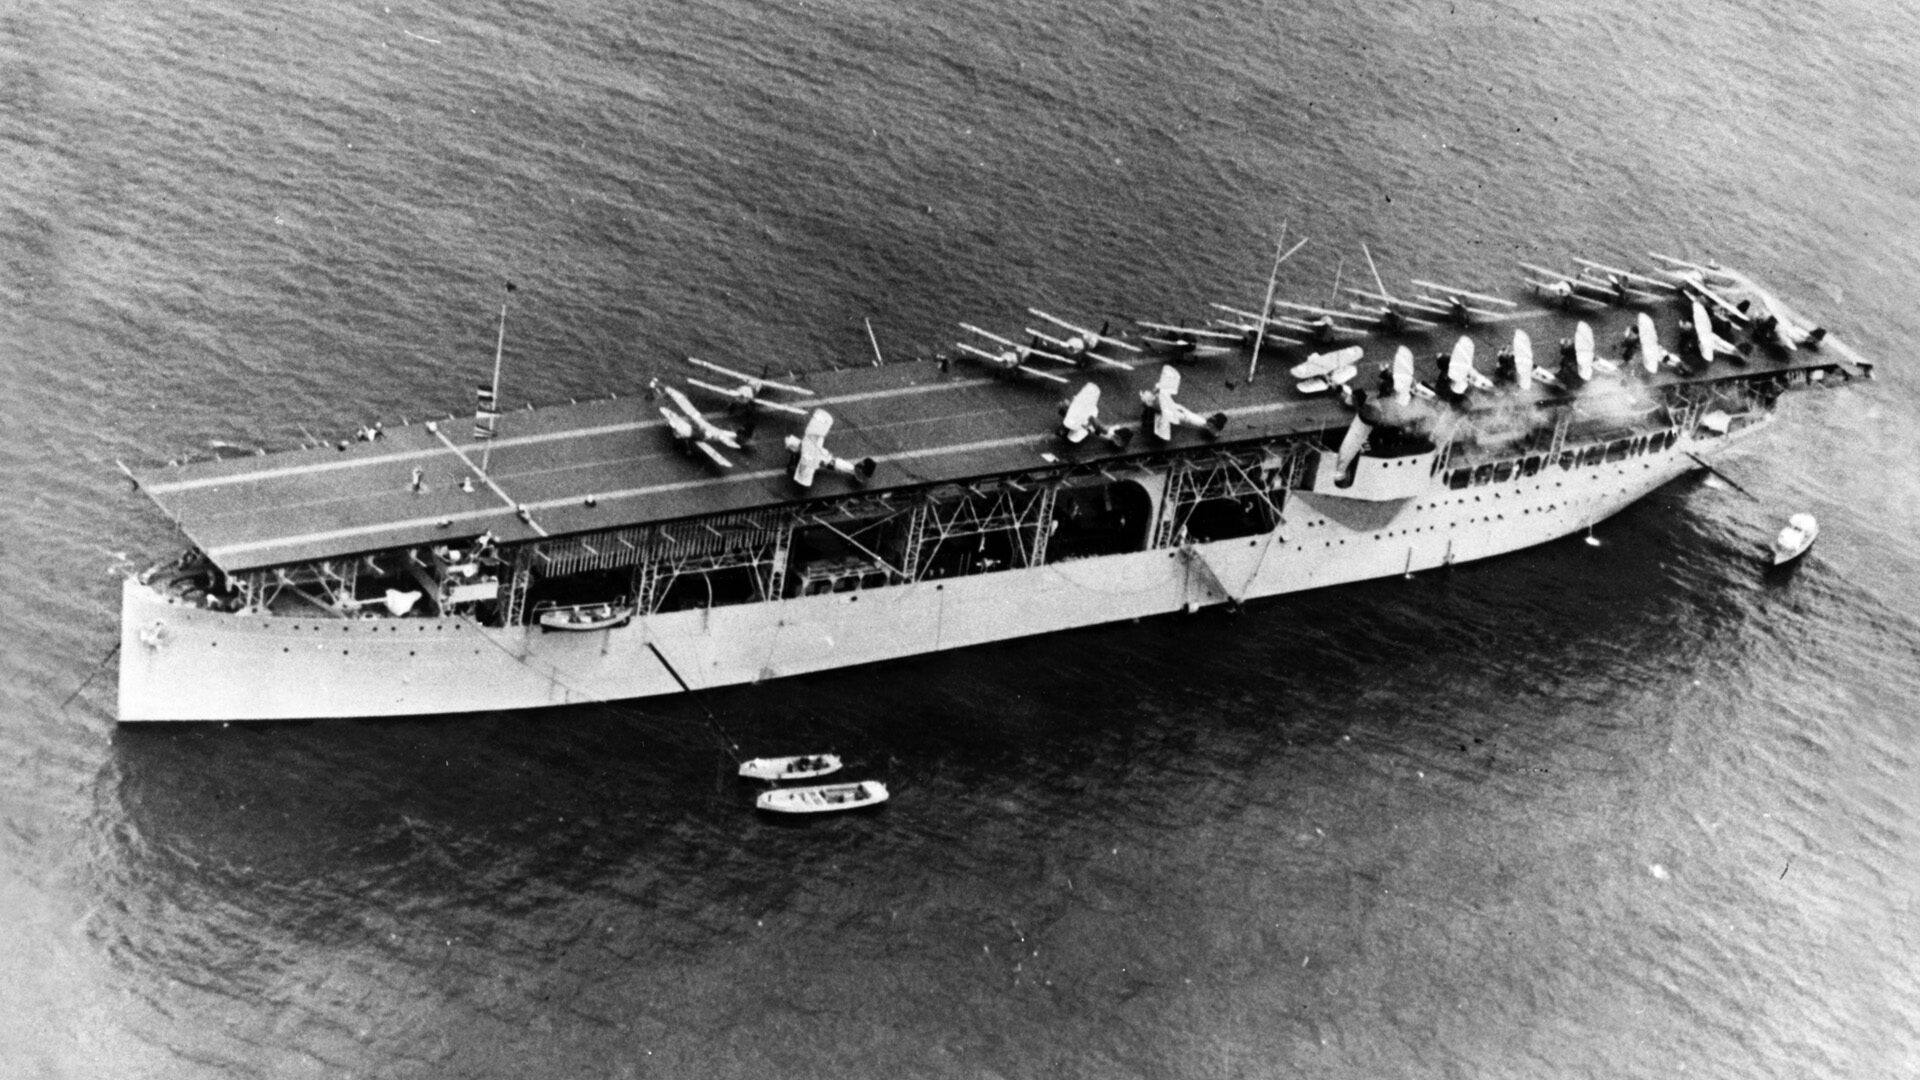 The USS Langley, the first operational aircraft carrier of the U.S. Navy, was converted from the fleet collier Jupiter in 1922. The carrier served as the cradle of U.S. naval aviation and was nicknamed “Covered Wagon” due to its resemblance to the wagons that crossed the American West in the 1800s.